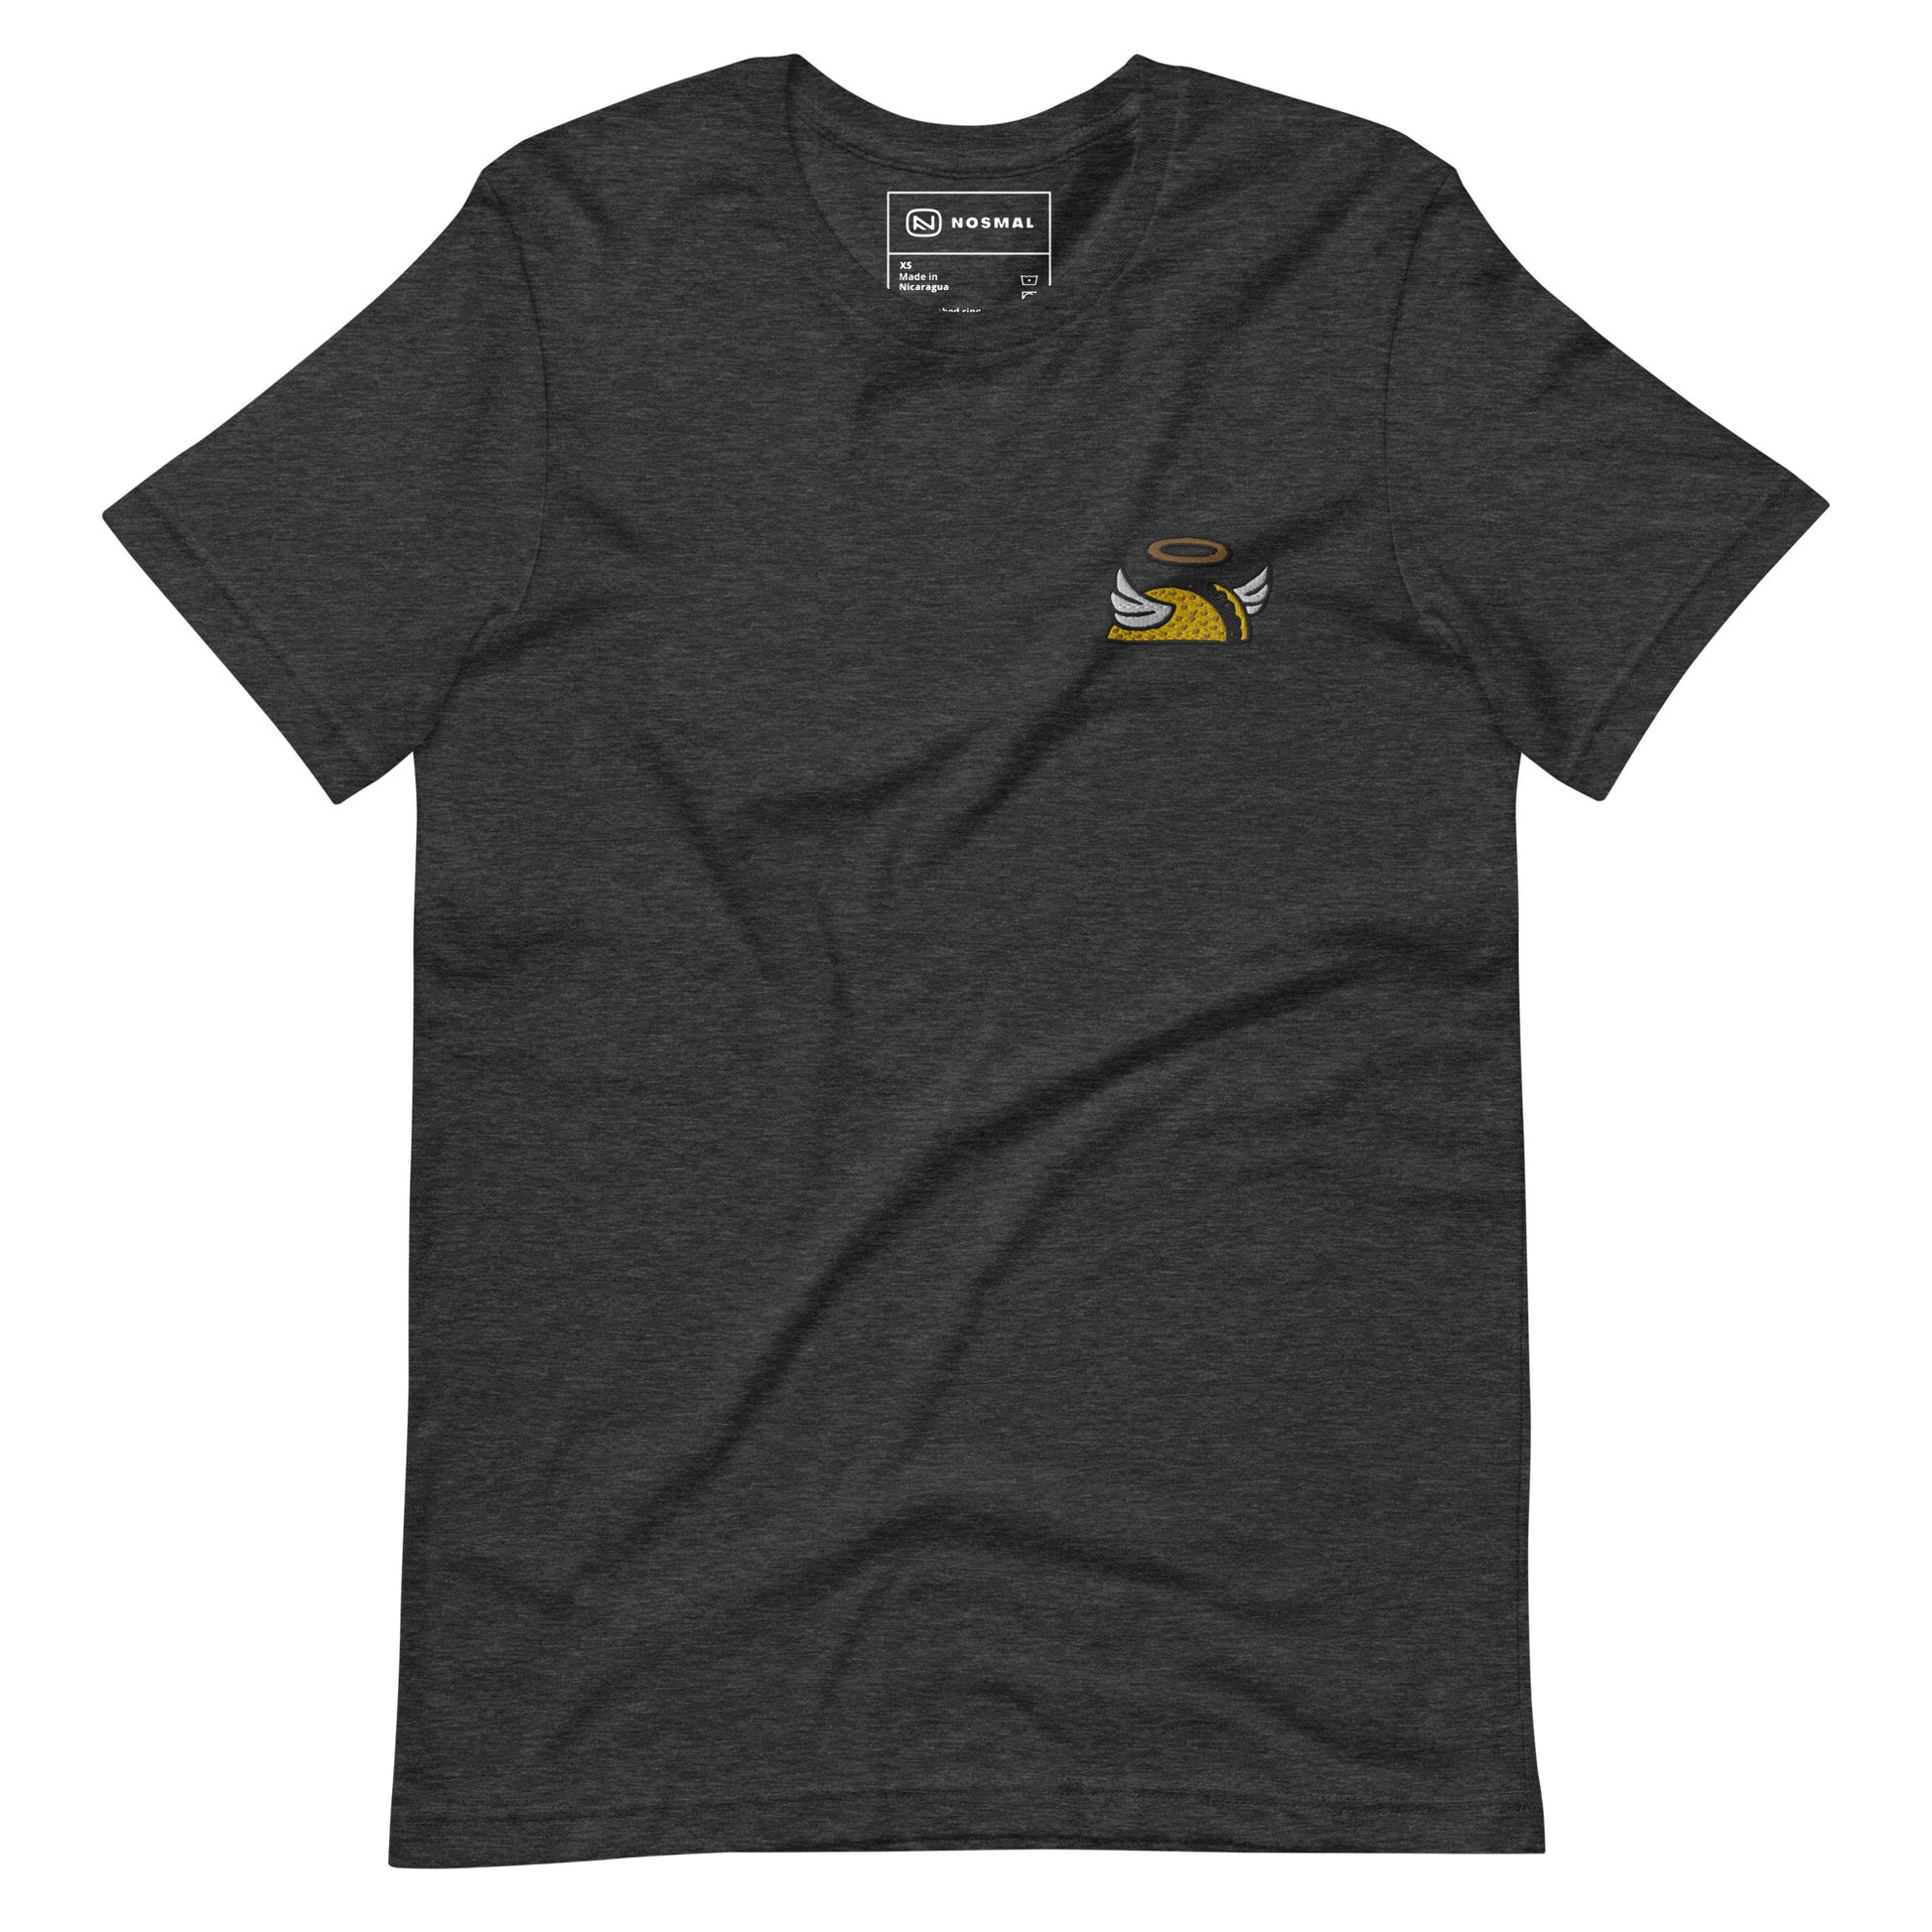 Straight on view of holy taco club embroidered design on heather dark grey unisex t-shirt.